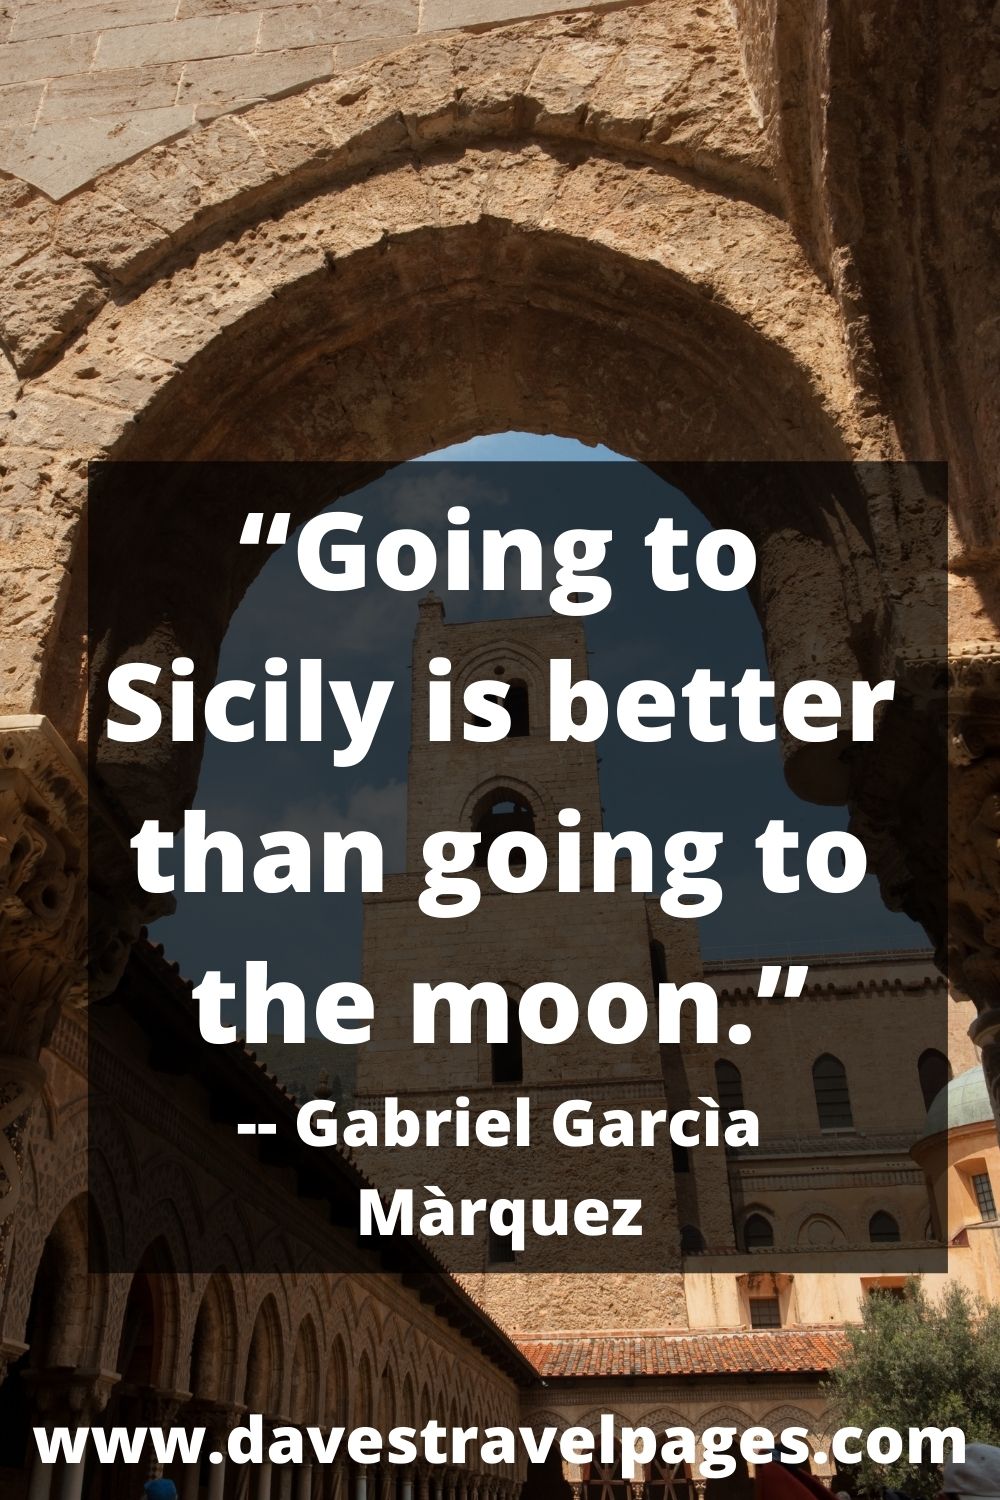 “Going to Sicily is better than going to the moon.” -- Gabriel Garcìa Màrquez